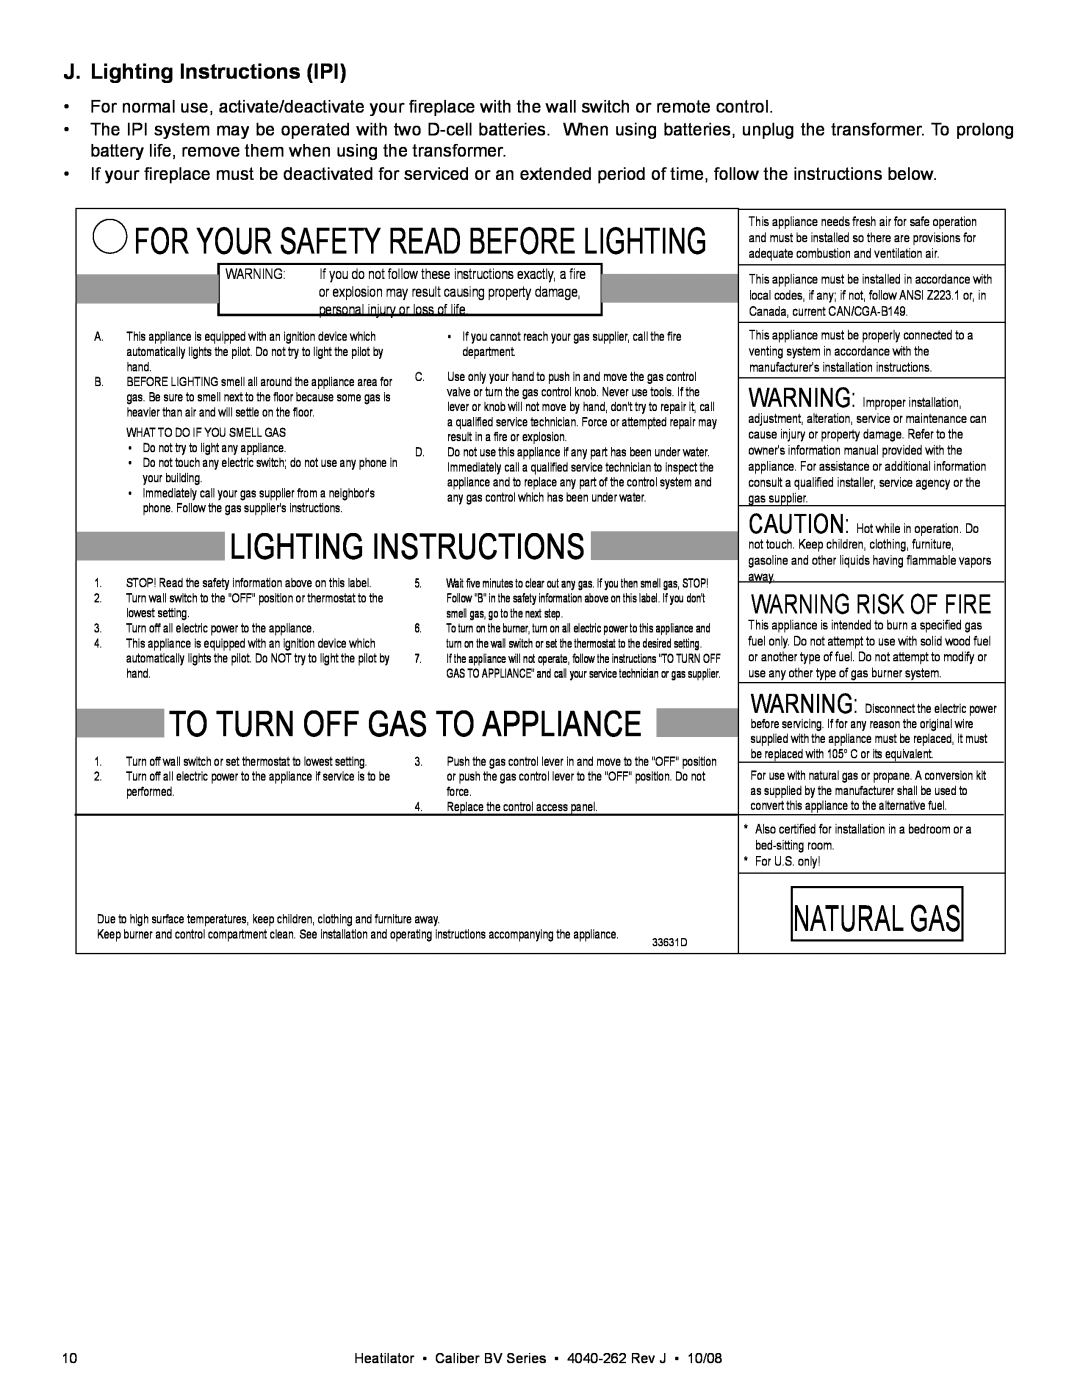 Hearth and Home Technologies CB4236IR, CB4842IR J. Lighting Instructions IPI, Natural Gas, To Turn Off Gas To Appliance 